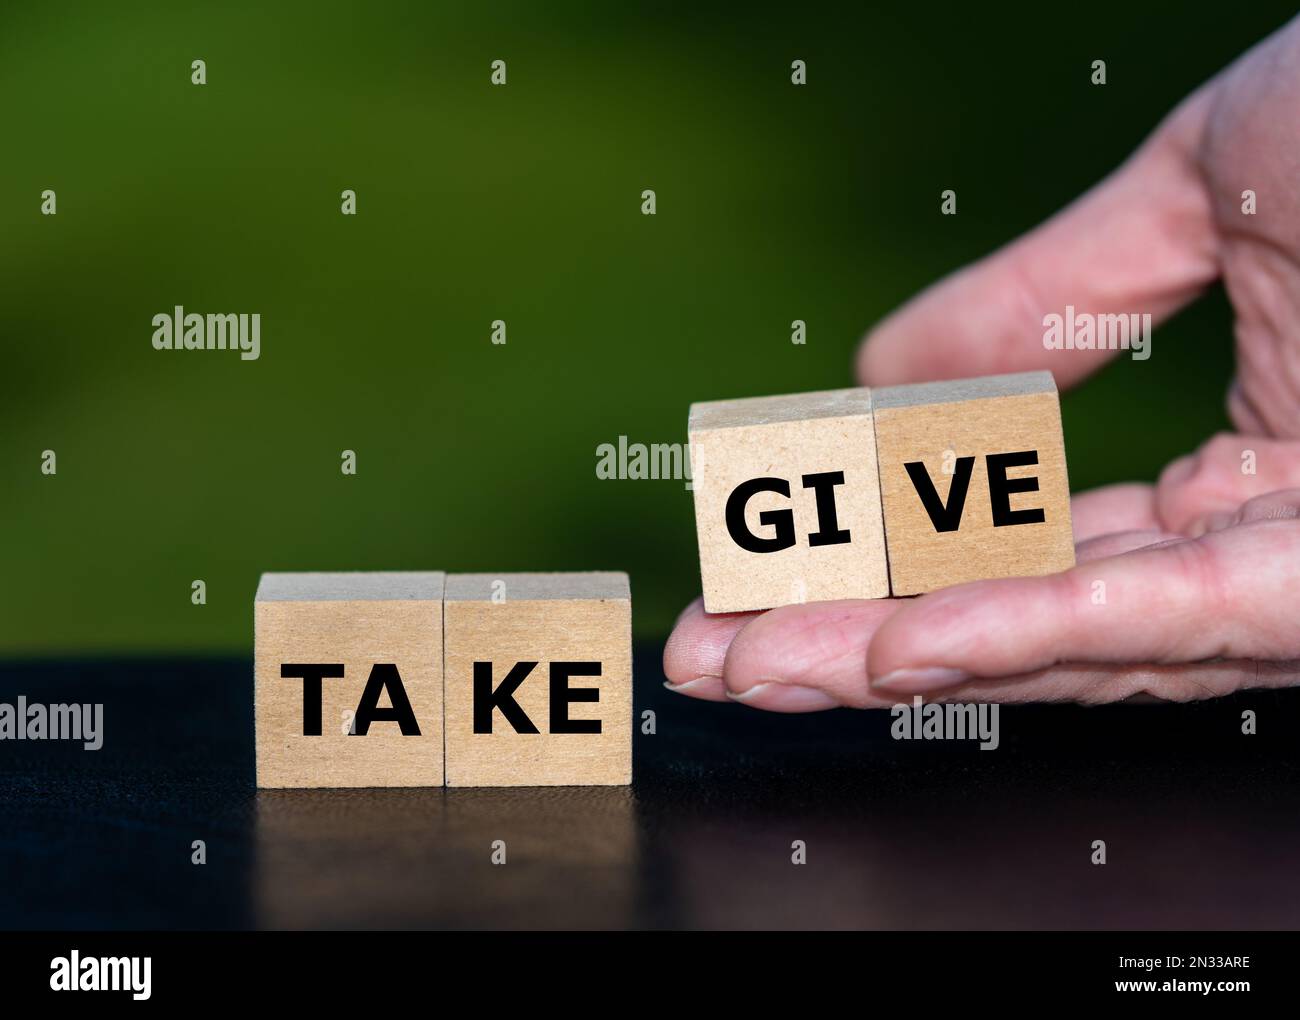 Cubes form the words give and take. Symbol for giving instead of taking something. Stock Photo